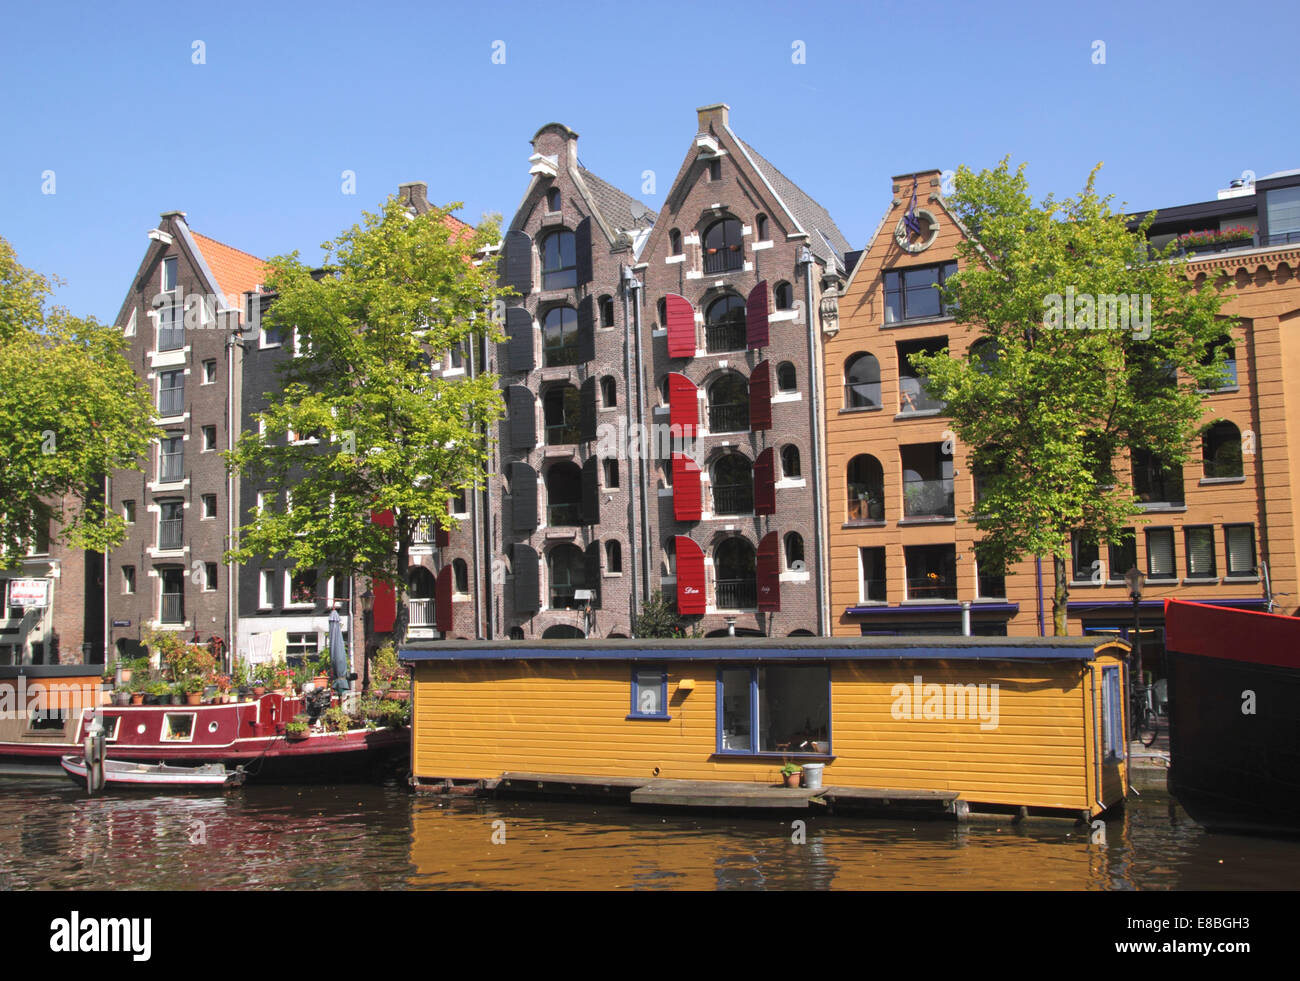 Canalside buildings by Brouwersgracht Canal Amsterdam Holland Stock Photo